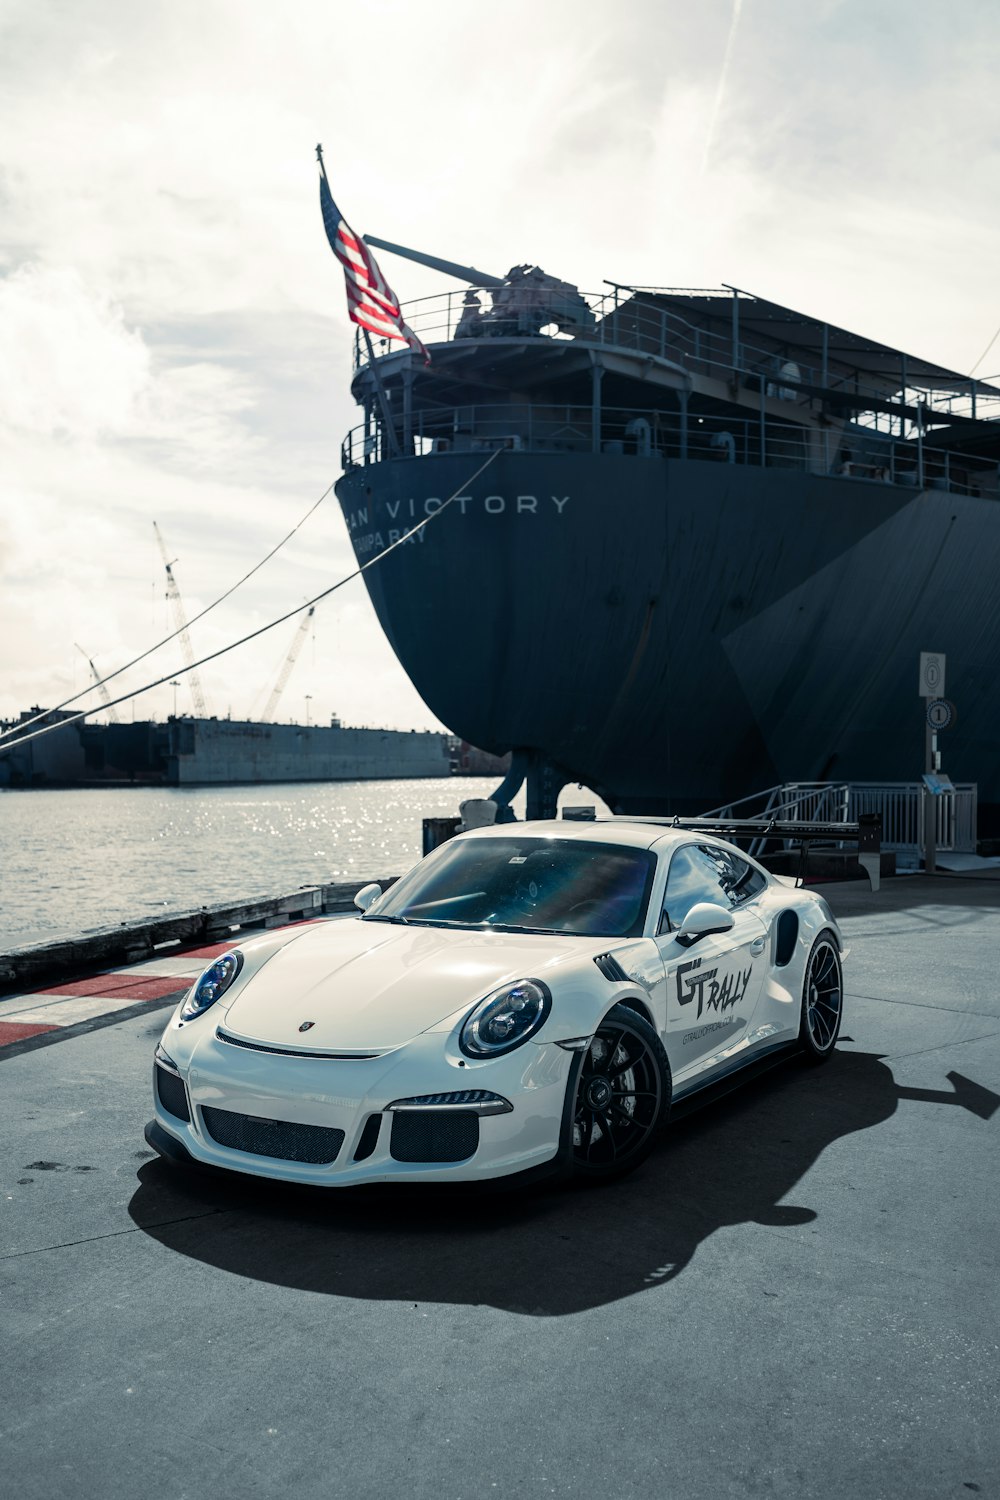 a white sports car parked in front of a large ship